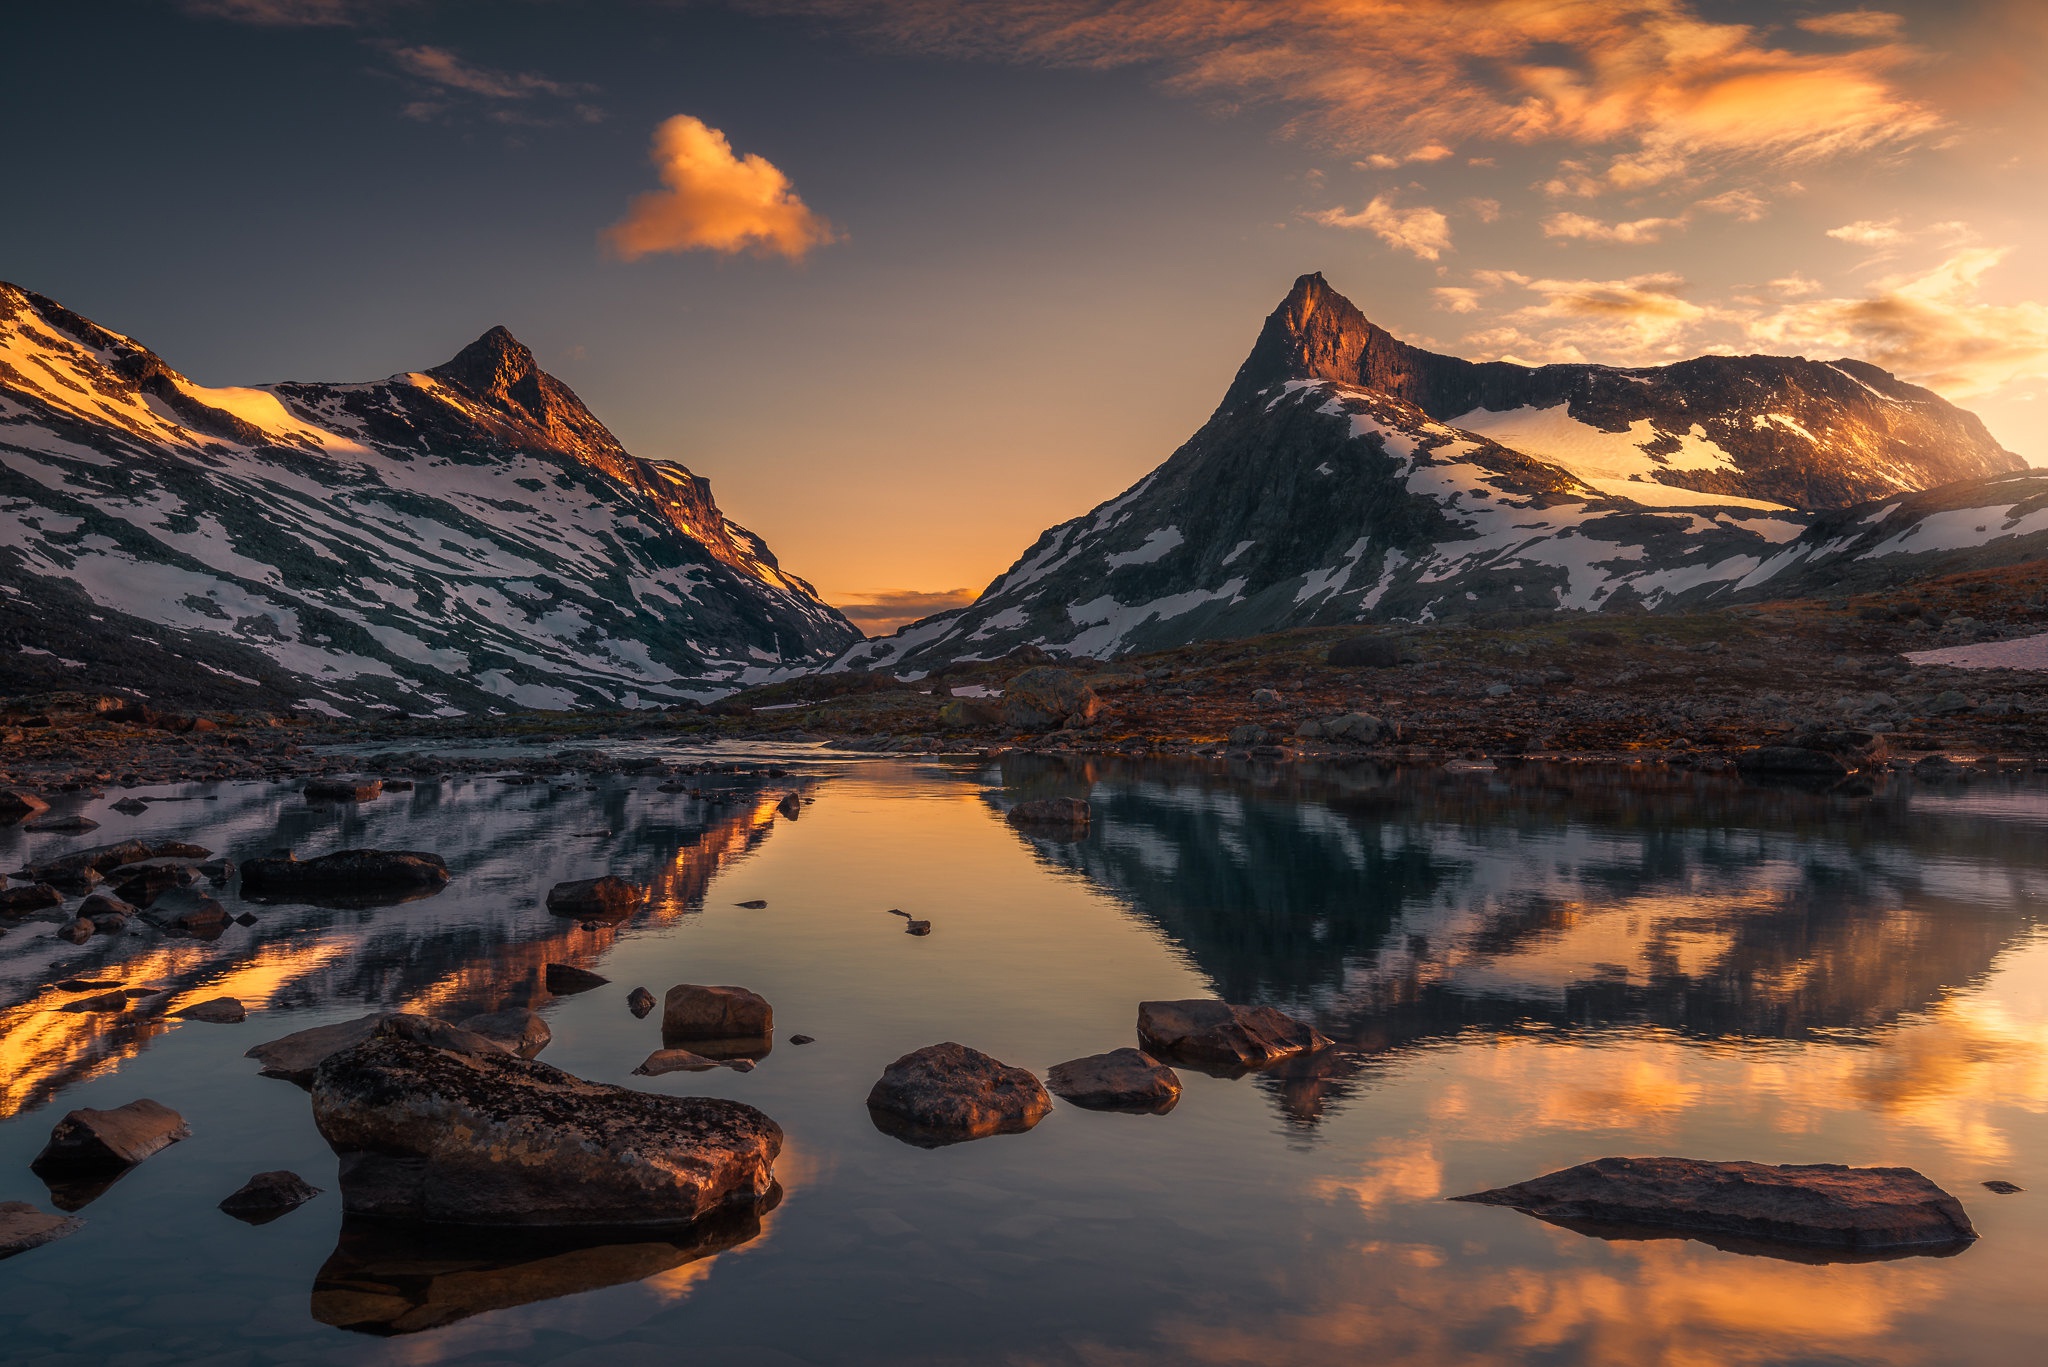 General 2048x1367 nature mountains snow reflection water Norway